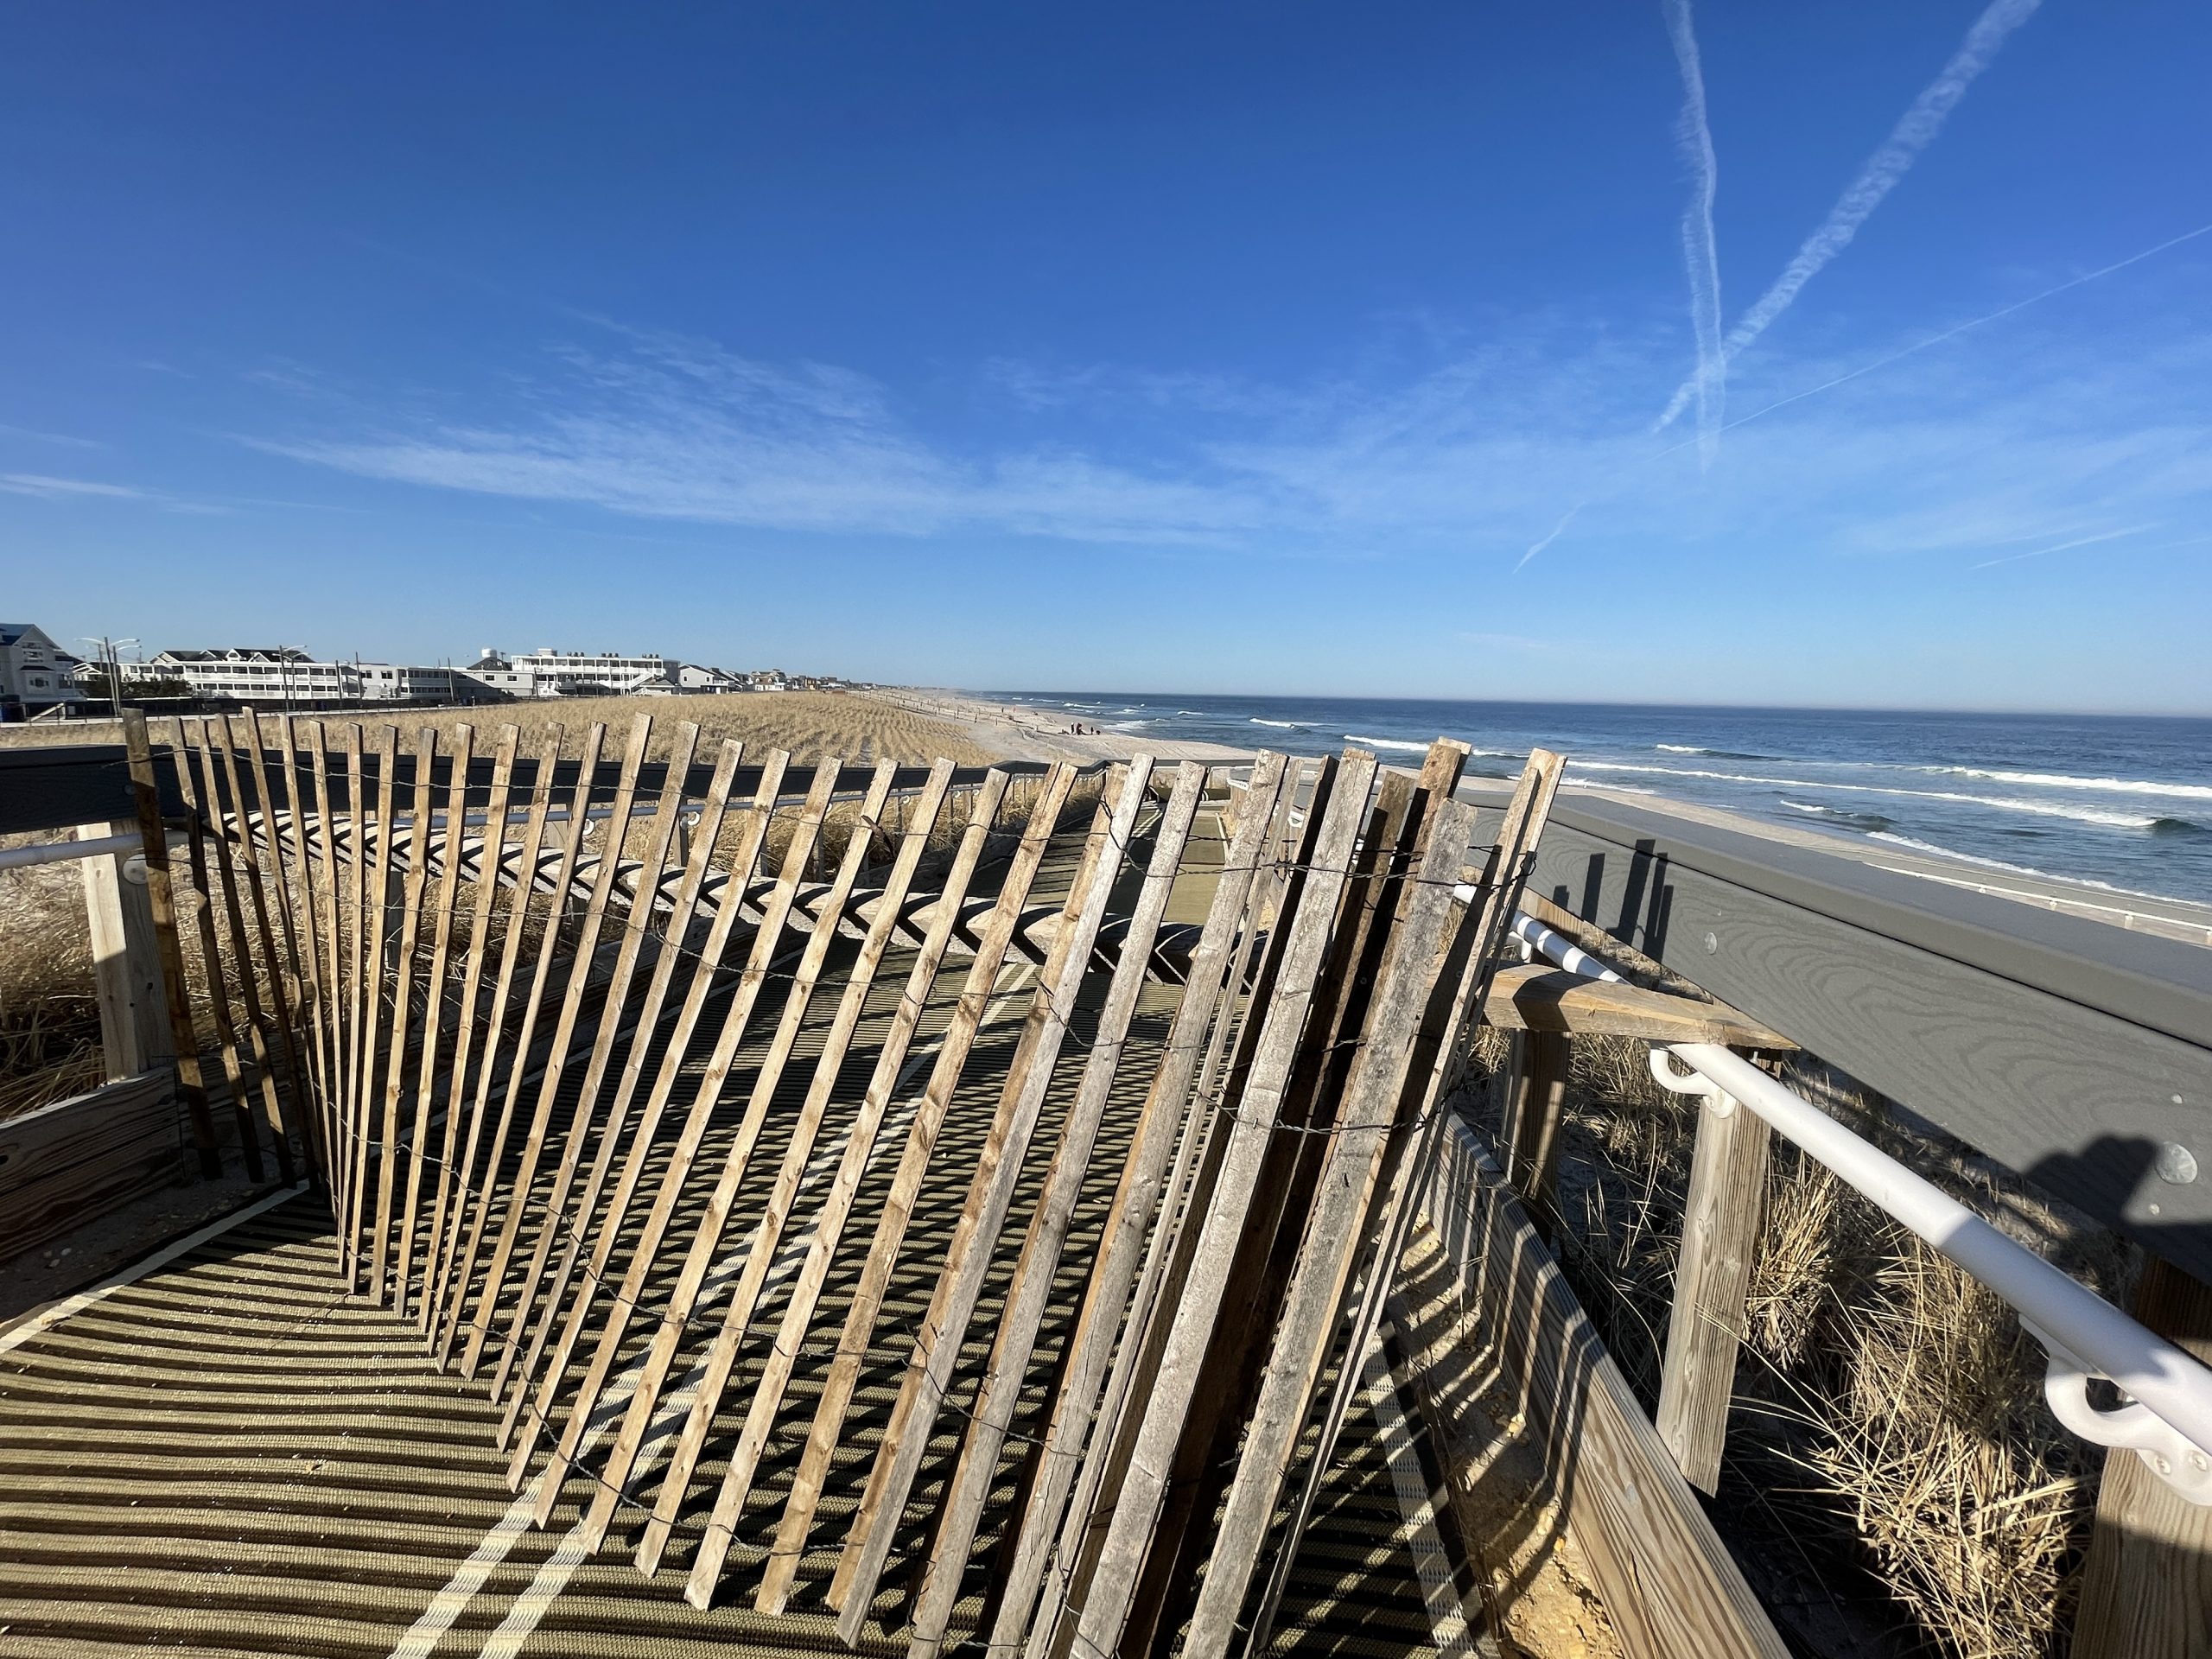 Toms River beaches in March 2021, still showing signs of damage from the Feb. 1-2 nor'easter. (Photo: Daniel Nee)